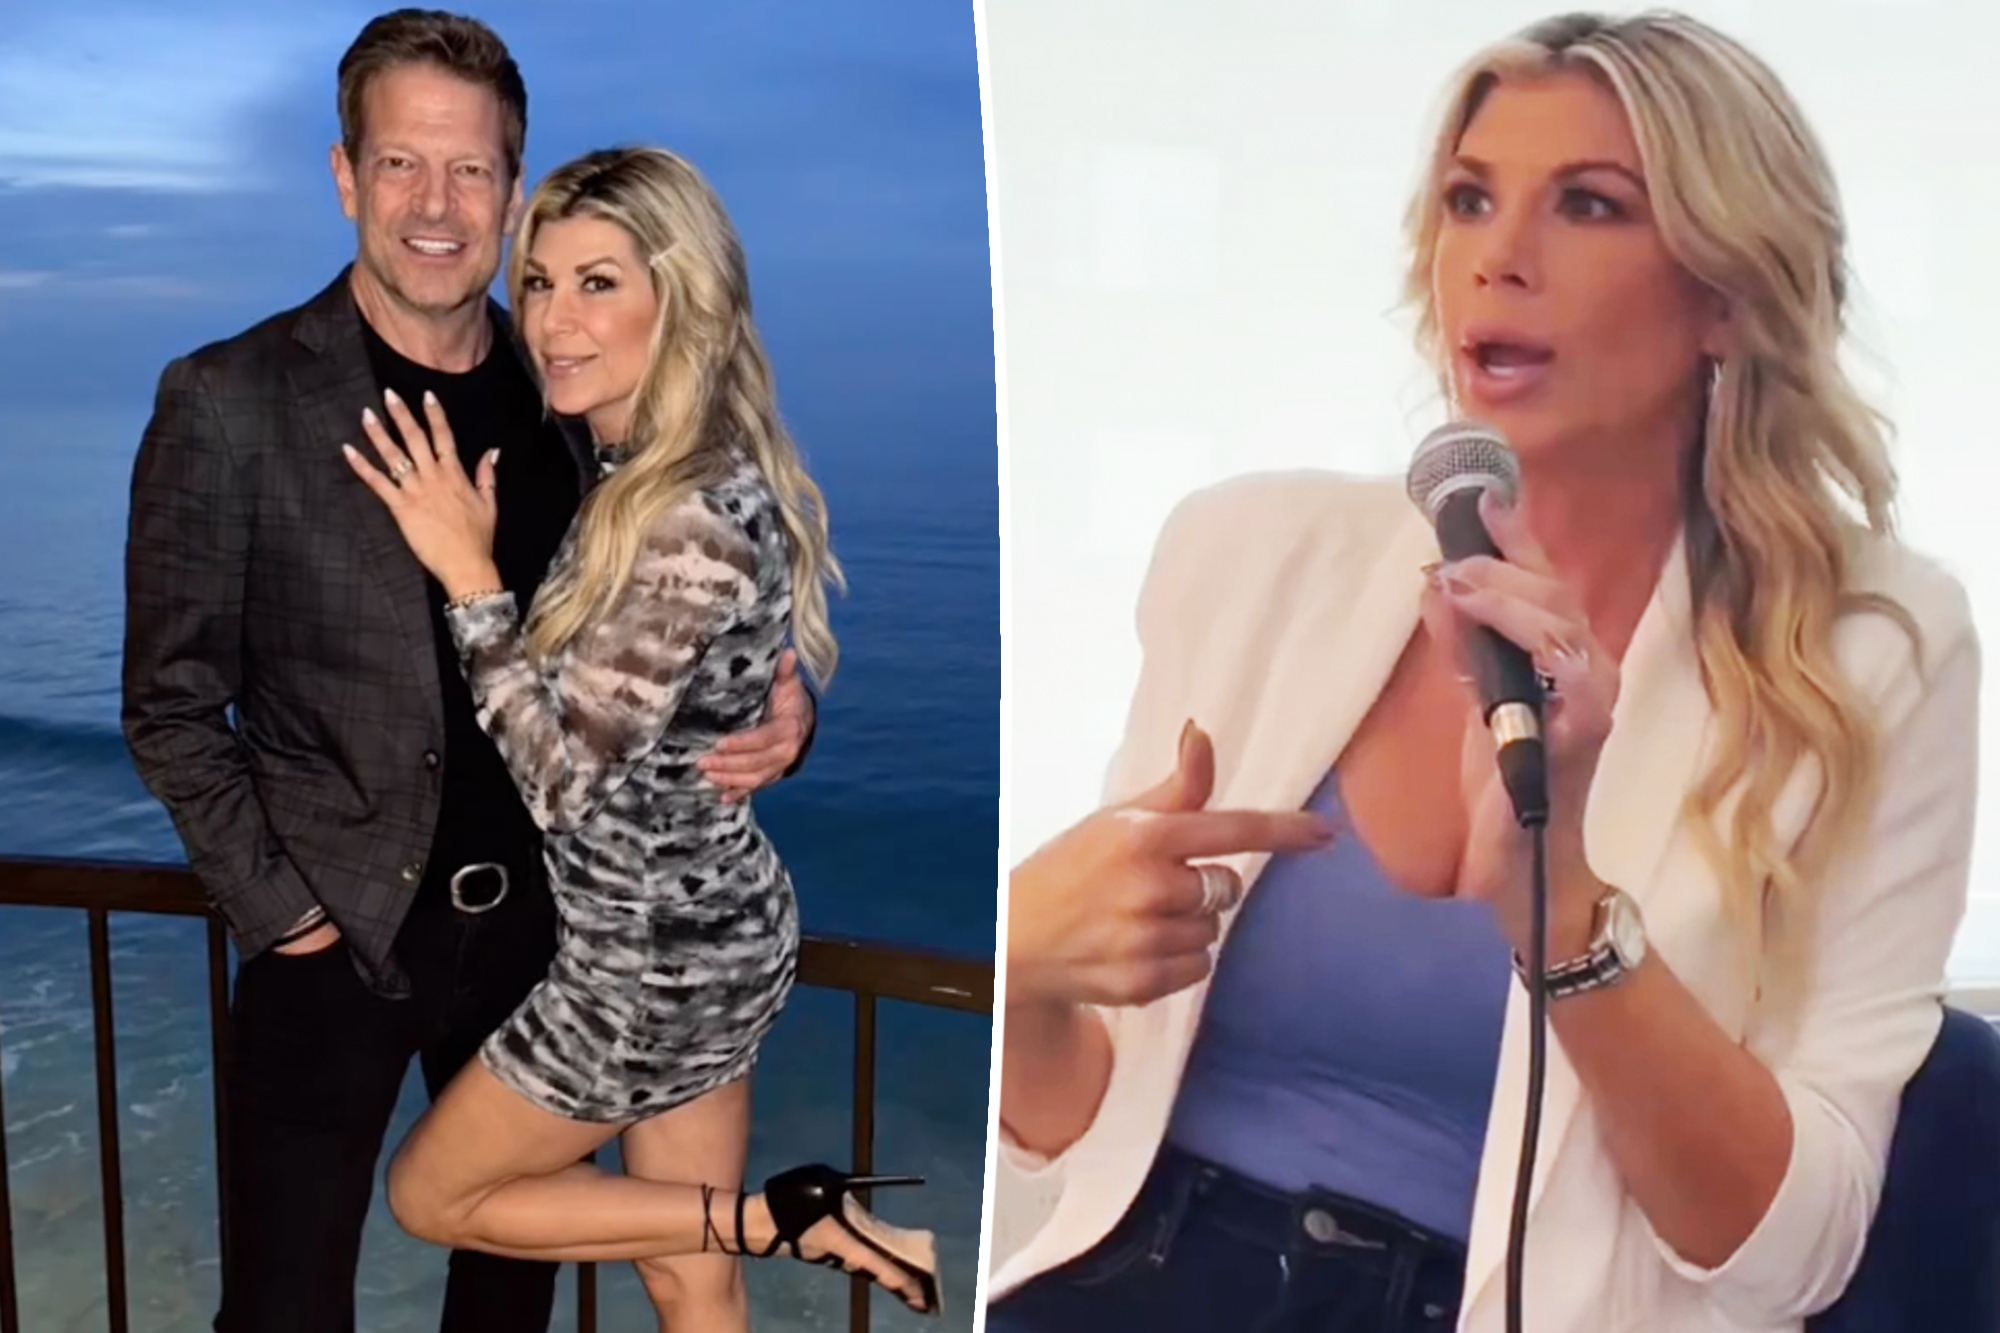 RHOC Star Alexis Bellino Spills the Tea on Her Steamy Sex Life: More Than 4 Times a Day!